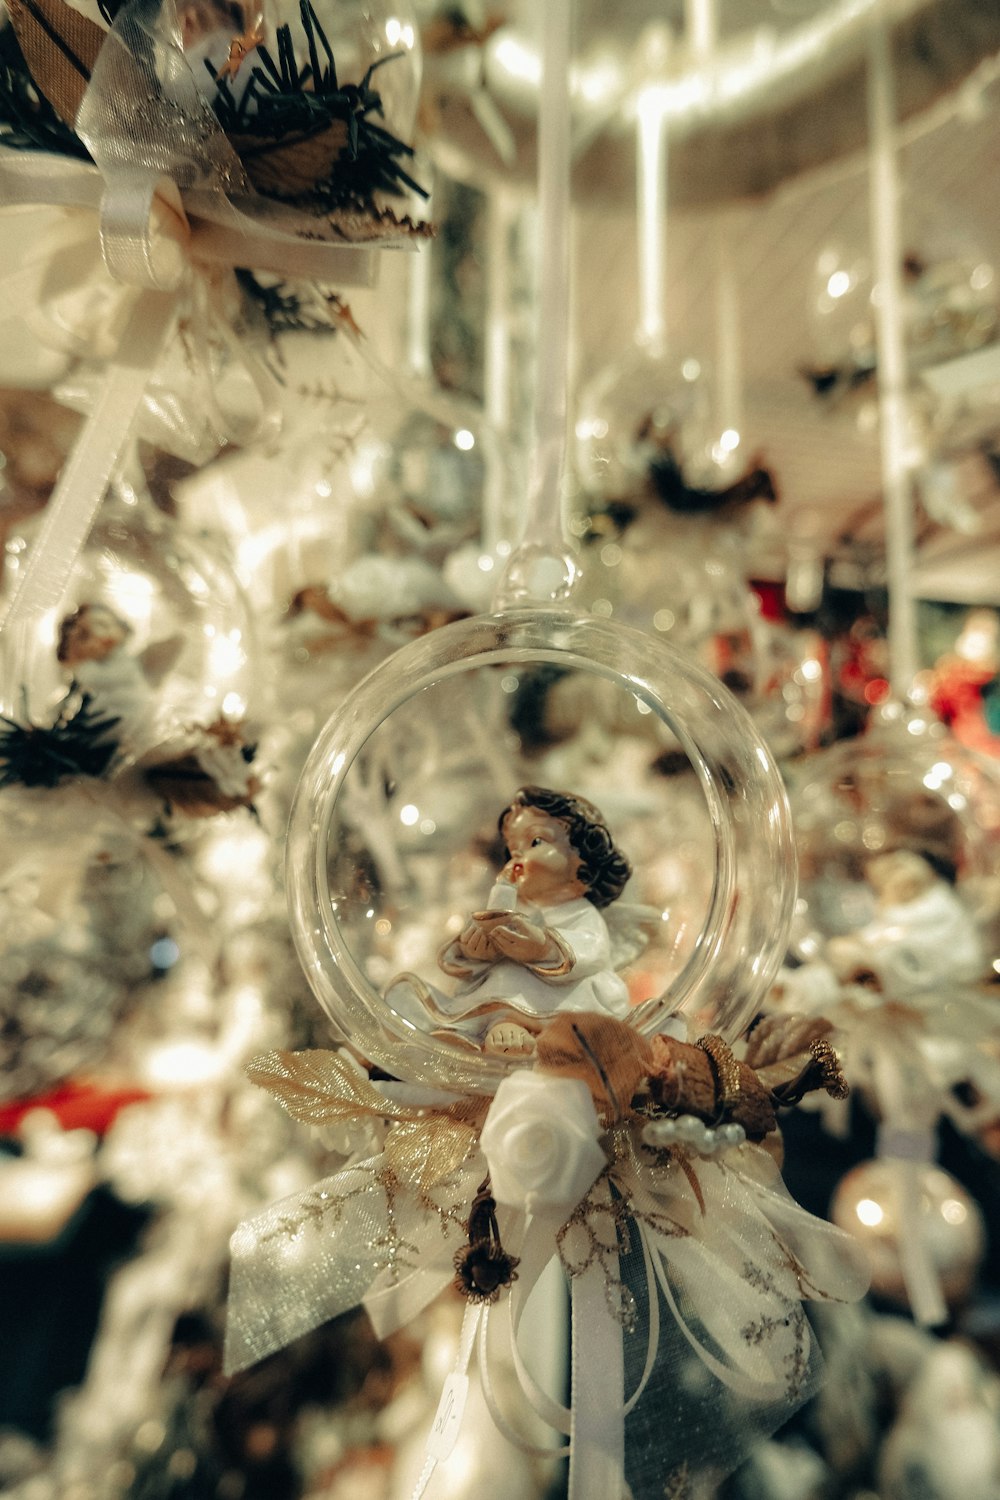 a glass ornament hanging from a ceiling